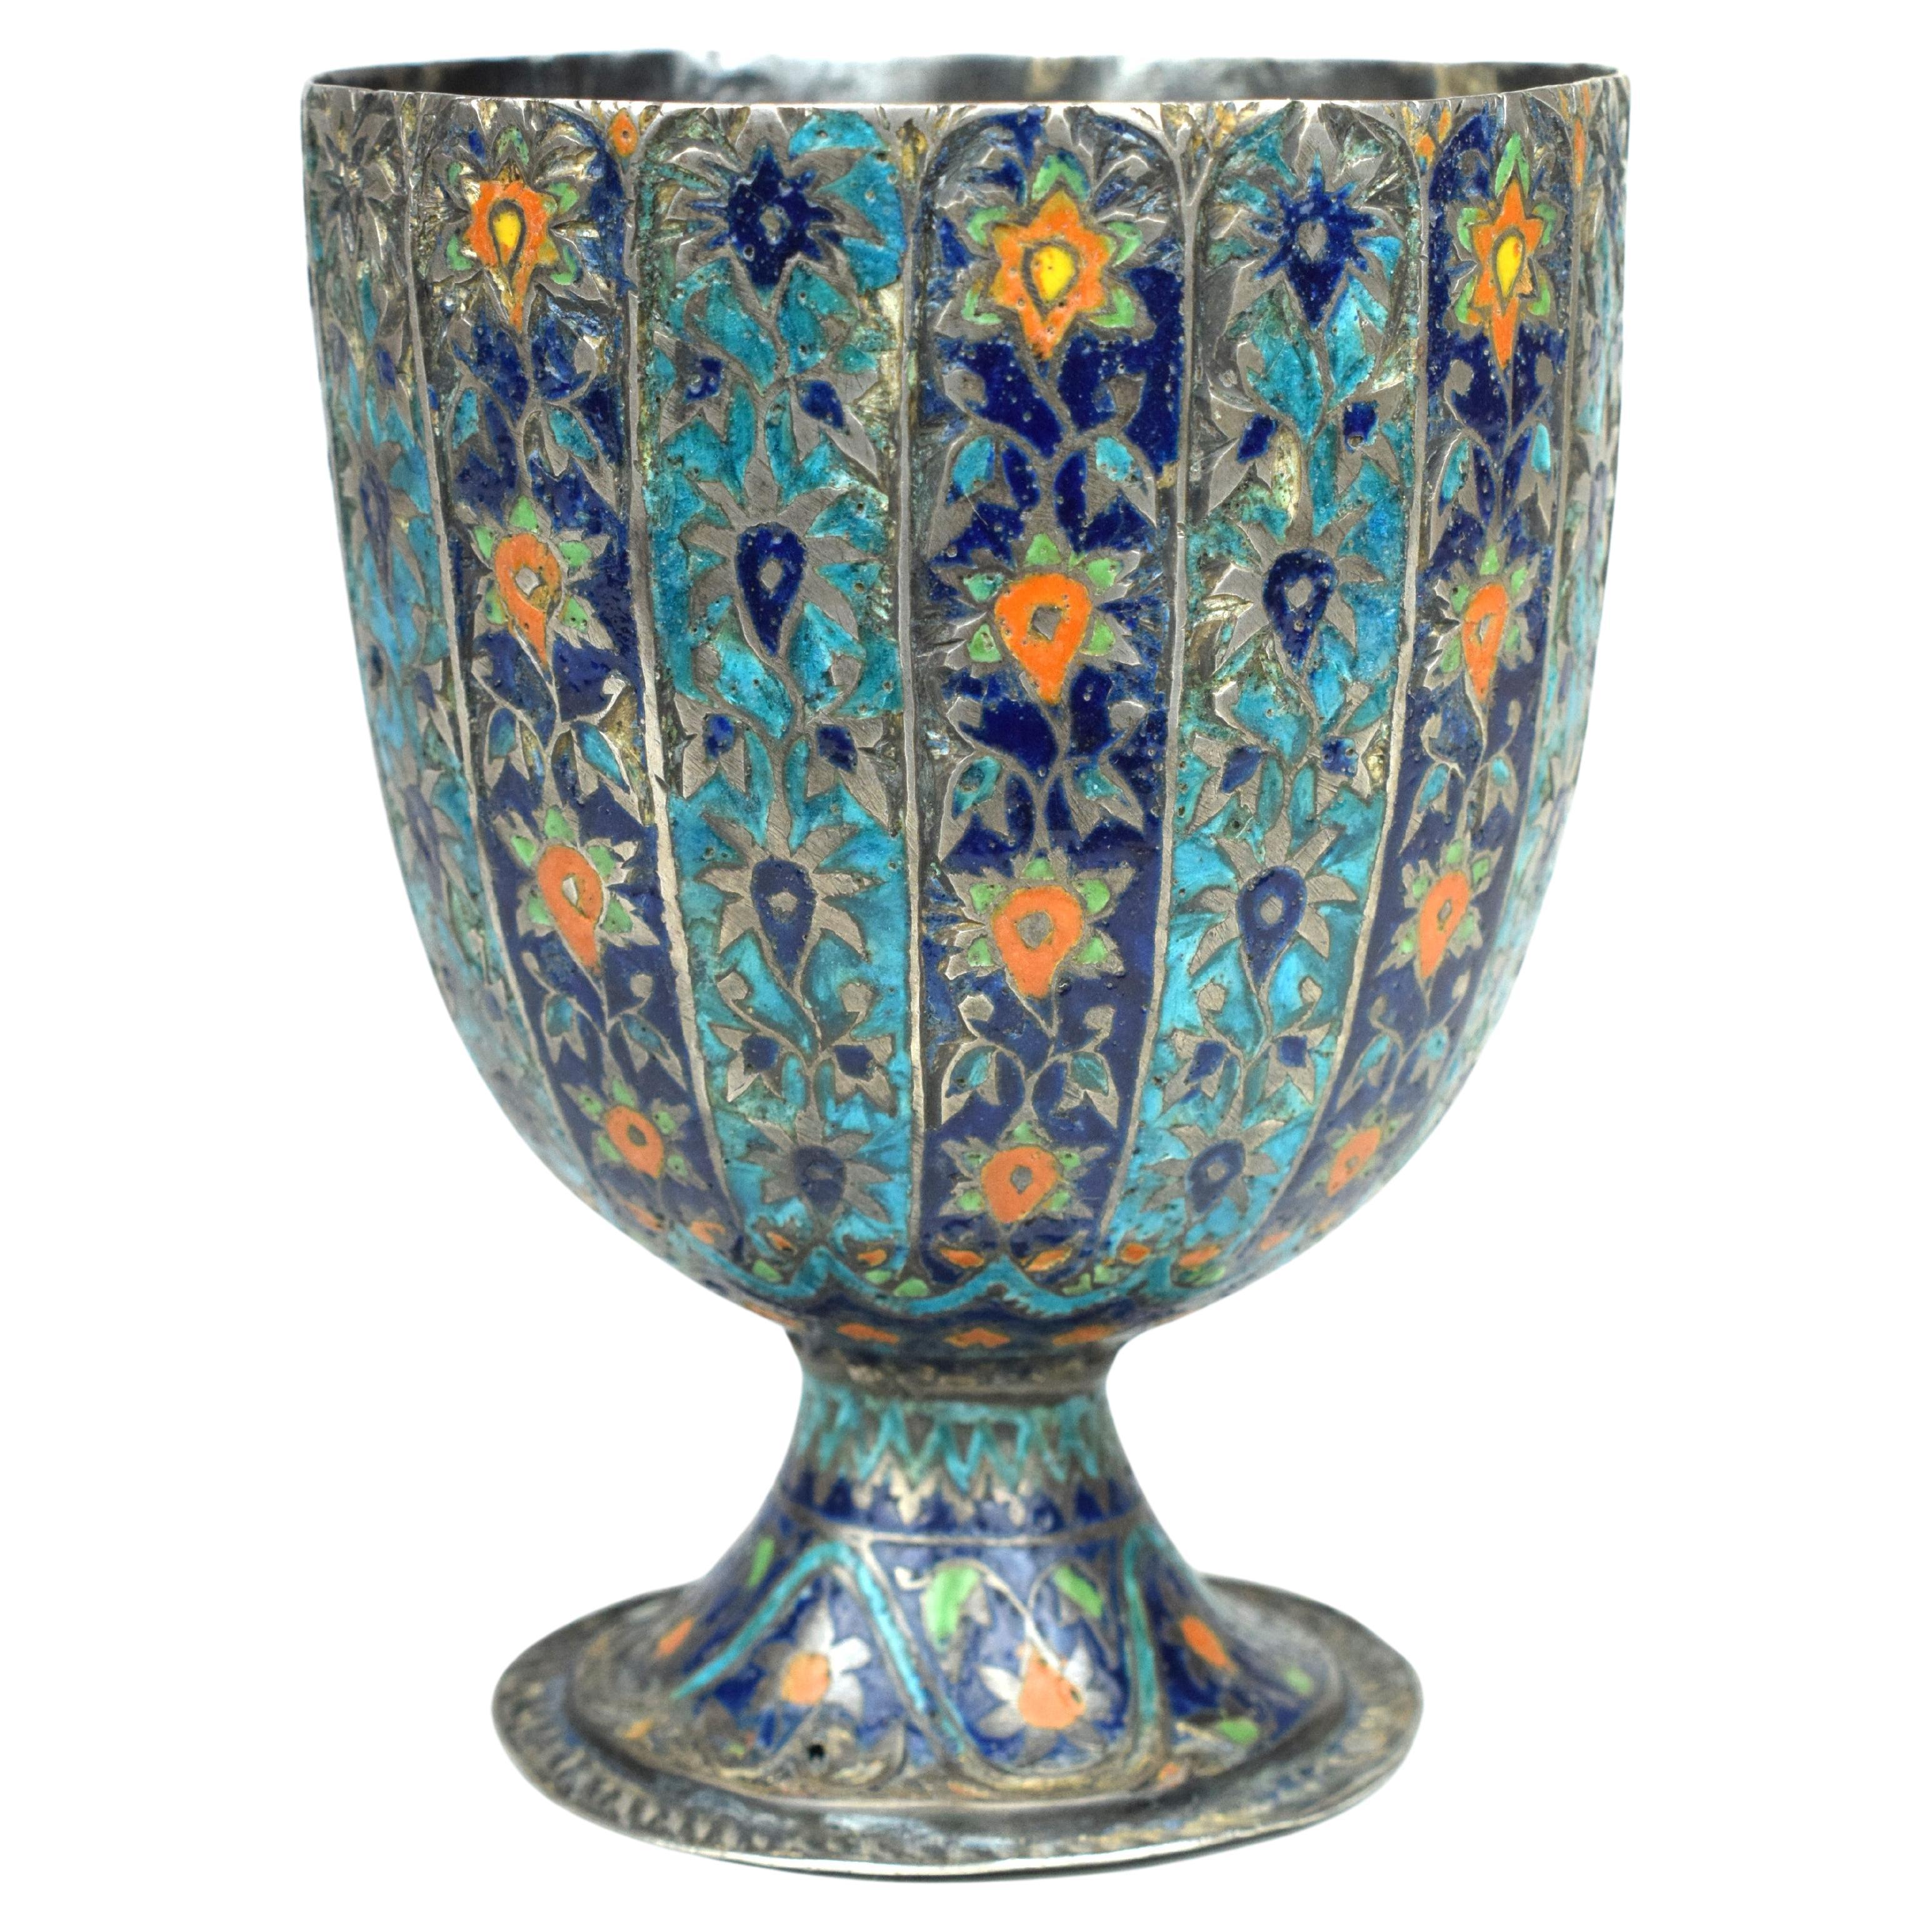 This Mughal Meena Silver Ceremonial Goblet from the 18th century is a masterpiece that reflects the opulence and artistic sophistication of the Mughal Empire. This goblet is adorned with exquisite meenakari or enamel work, a traditional technique